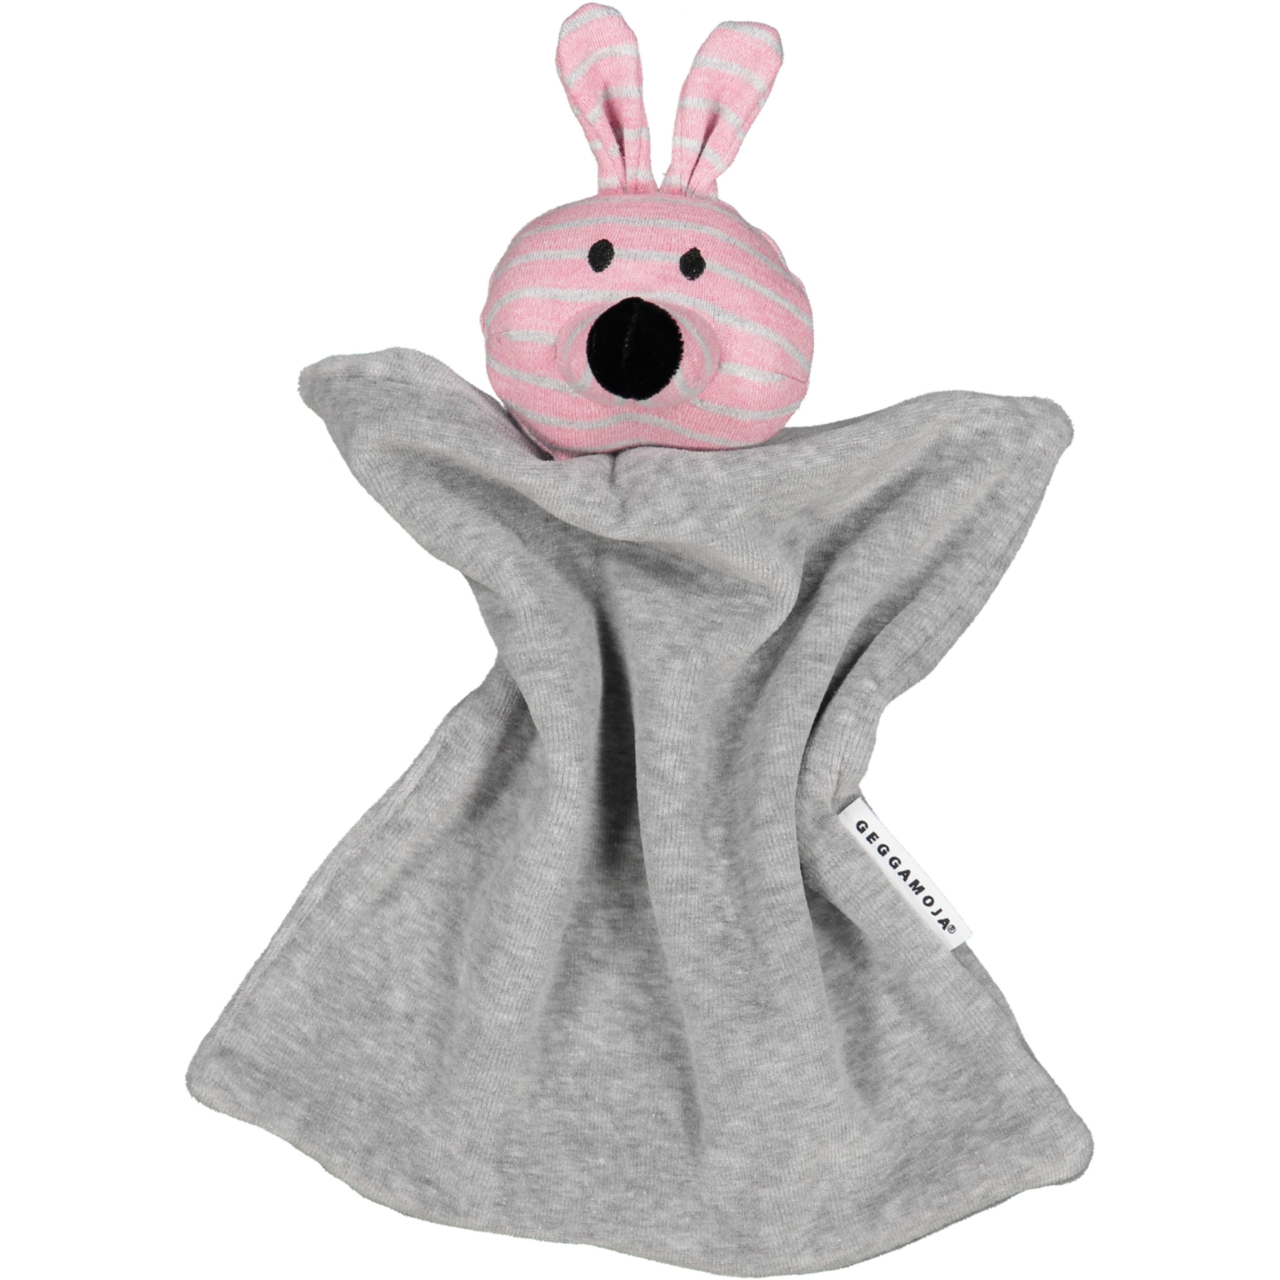 Cuddly toy classic Pink